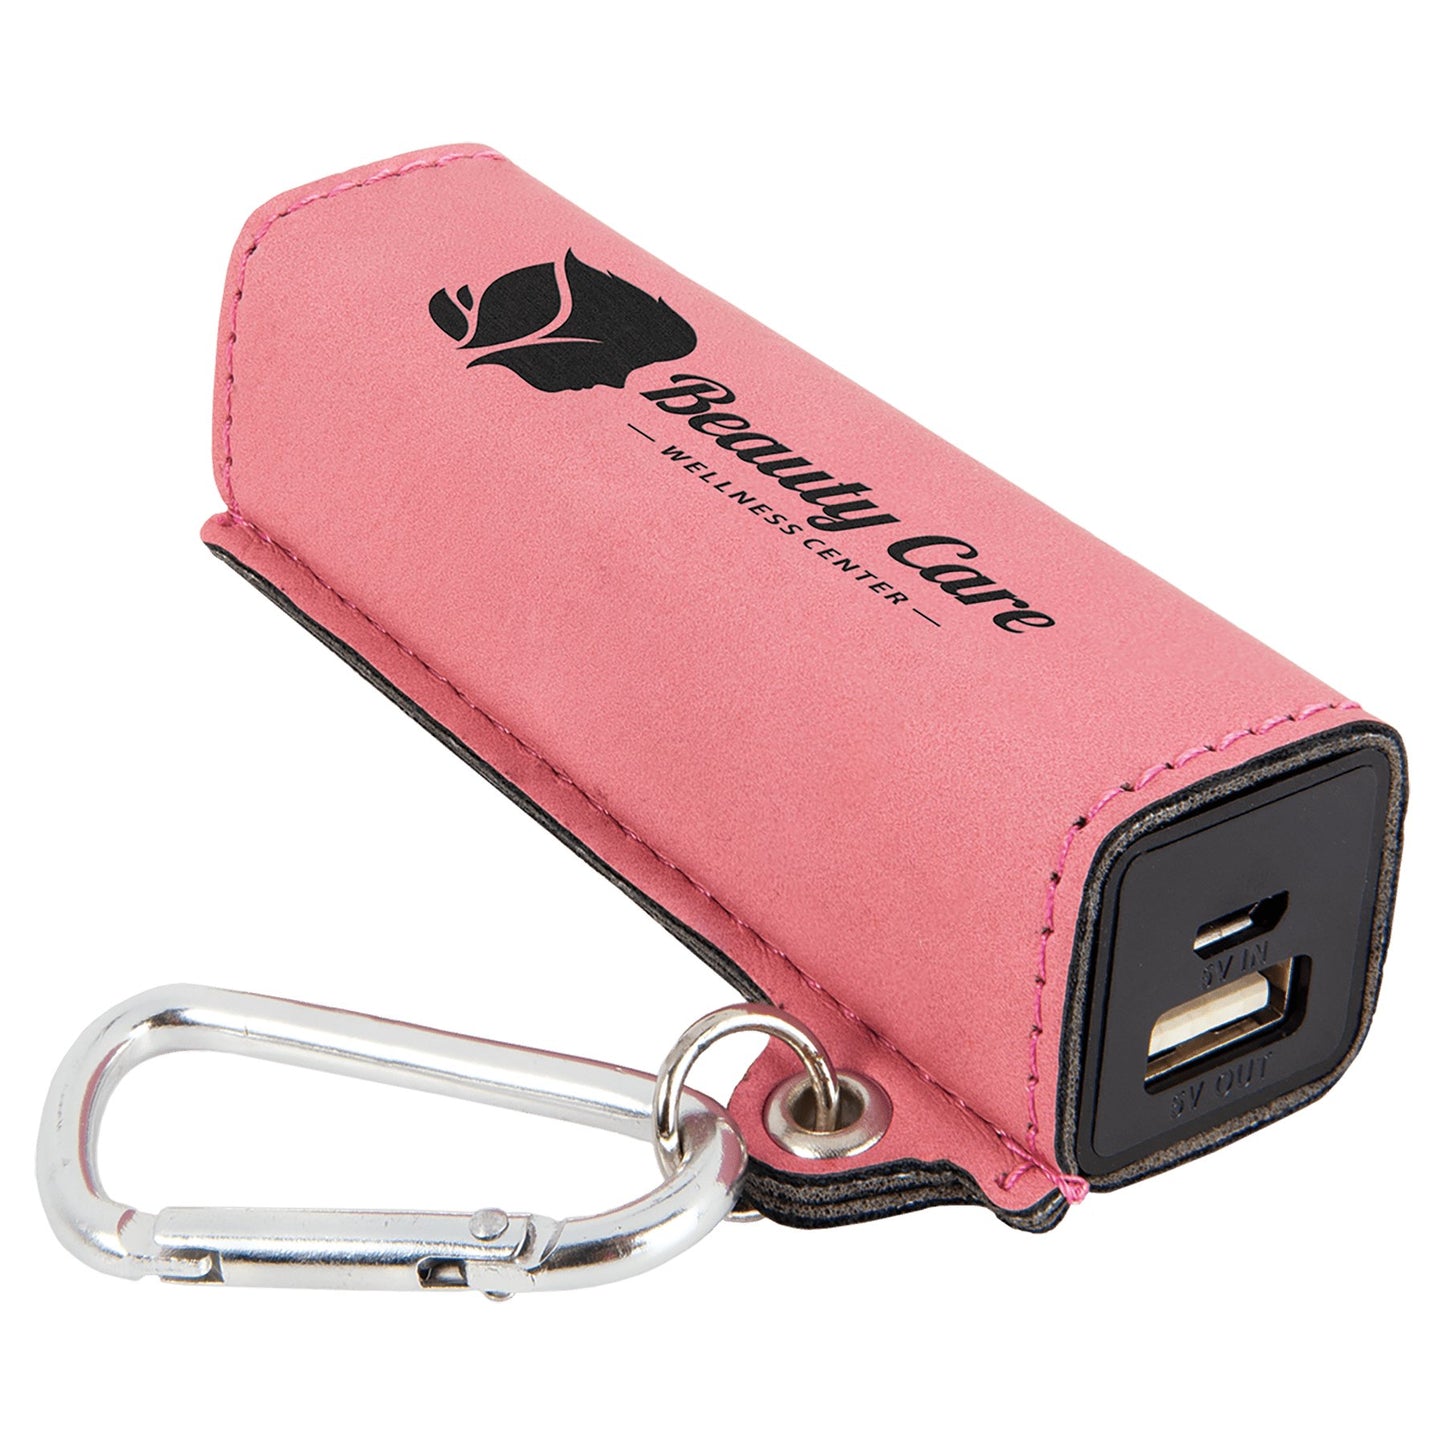 Laserable Leatherette 2200 mAh Power Bank with USB Cord - Legacy Creator IncPink